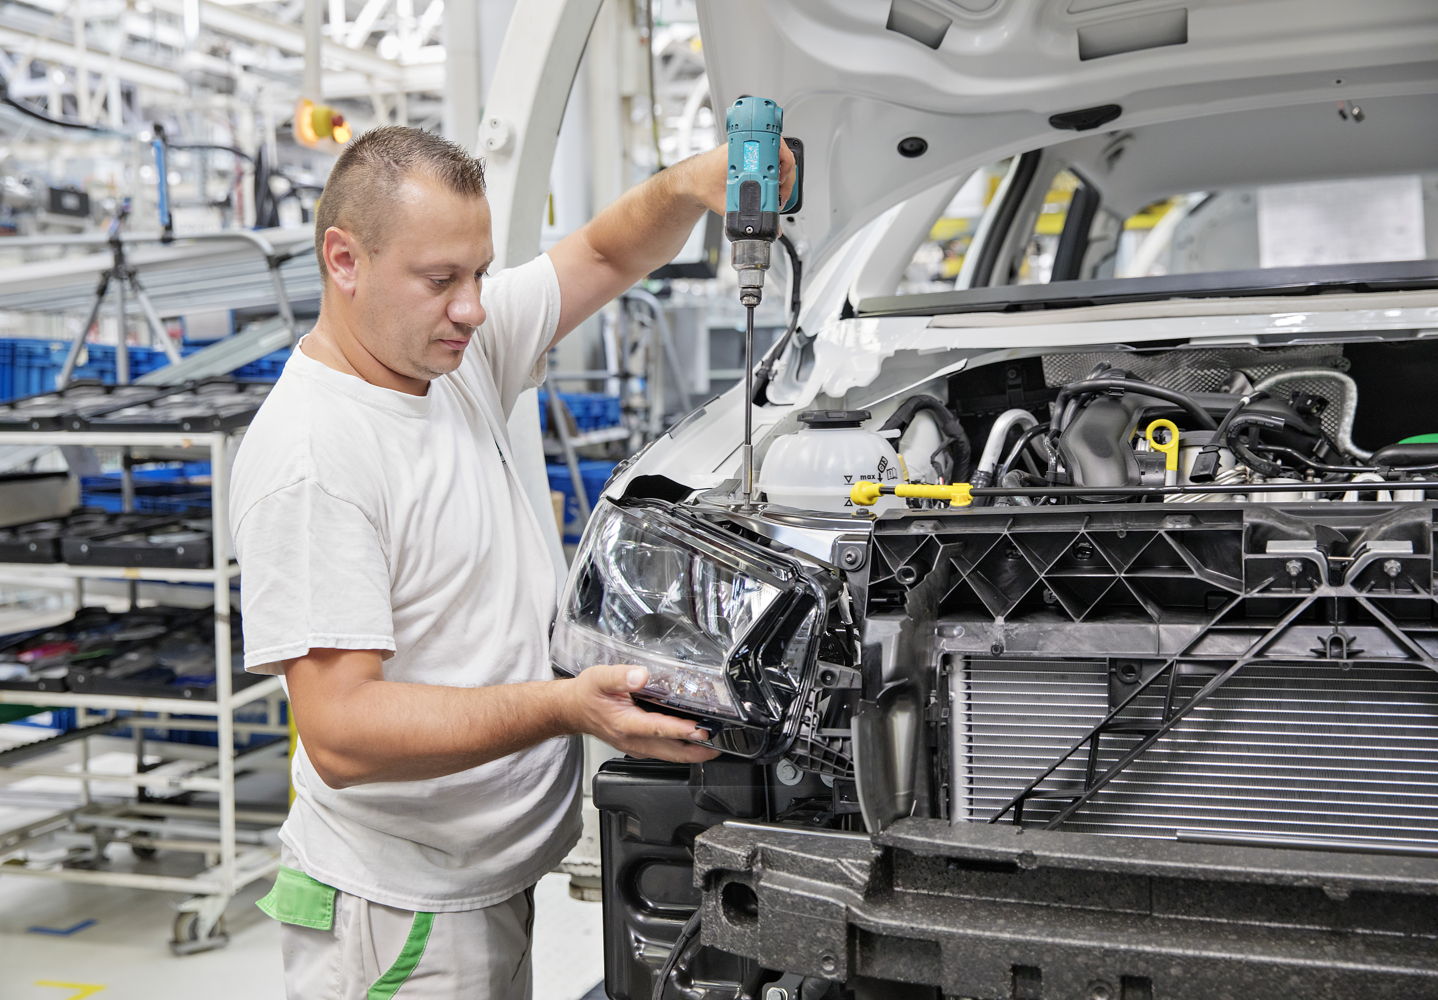 ŠKODA AUTO produced 886,100 vehicles in the Czech Republic in 2018. This corresponds to an increase of 3.3% compared to the previous year (2017: 858,000 vehicles).